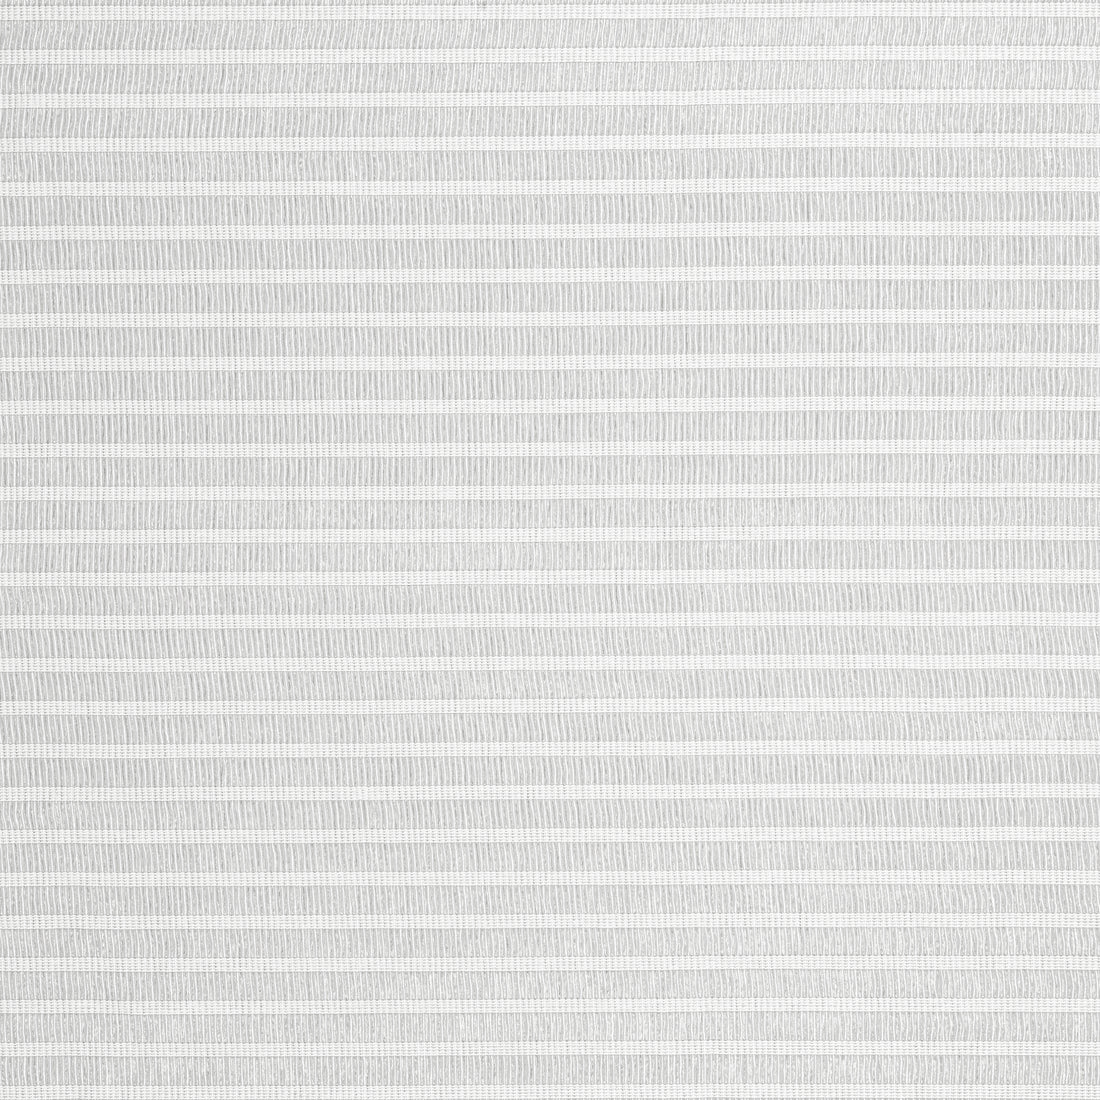 Lanai fabric in sterling color - pattern number FWW8269 - by Thibaut in the Aura collection